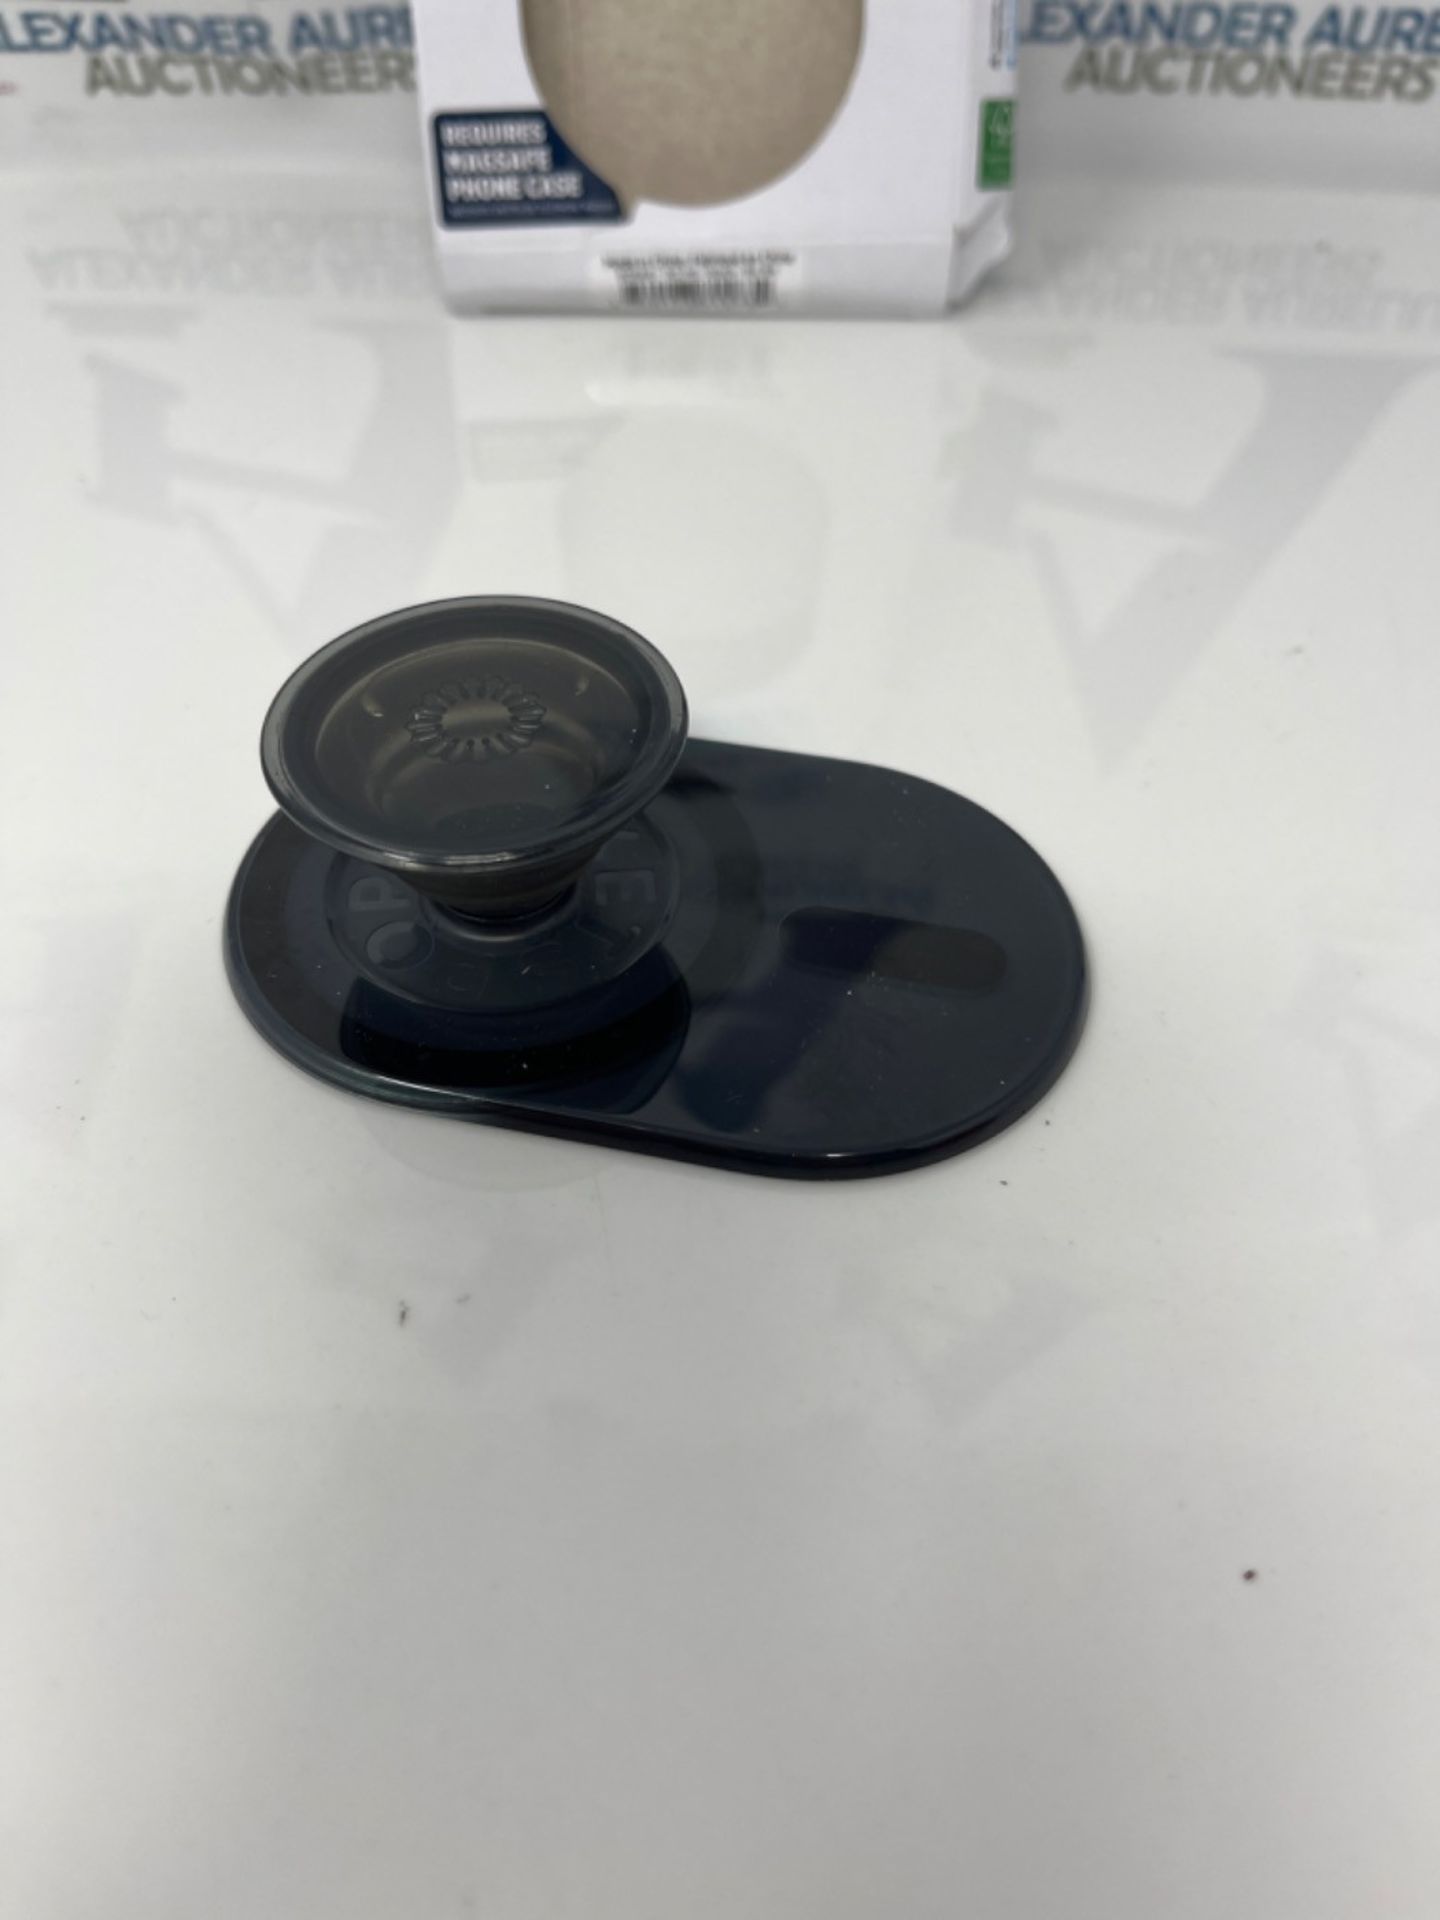 PopSockets: PopGrip for MagSafe - Expanding Phone Stand and Grip with a Swappable Top - Image 3 of 3